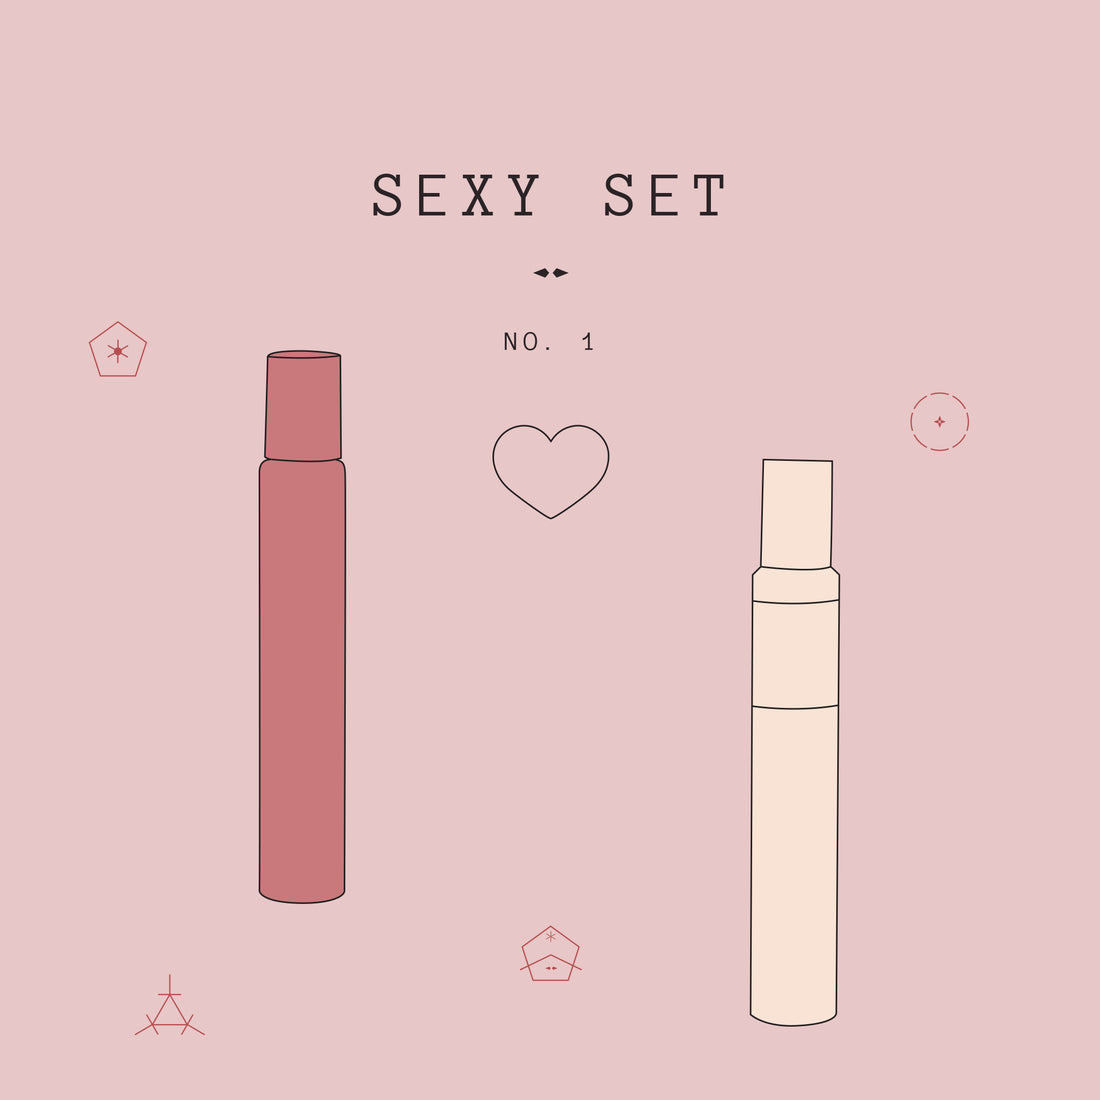 Sexy 1 Gift Set includes two products to help bring  out your sensual side.  PRODUCTS INCLUDED:  ・One Seed Seeker Natural Perfume Roll On, 9ml ・Serene Body Health Amplify Natural Perfume Roll On, 10ml